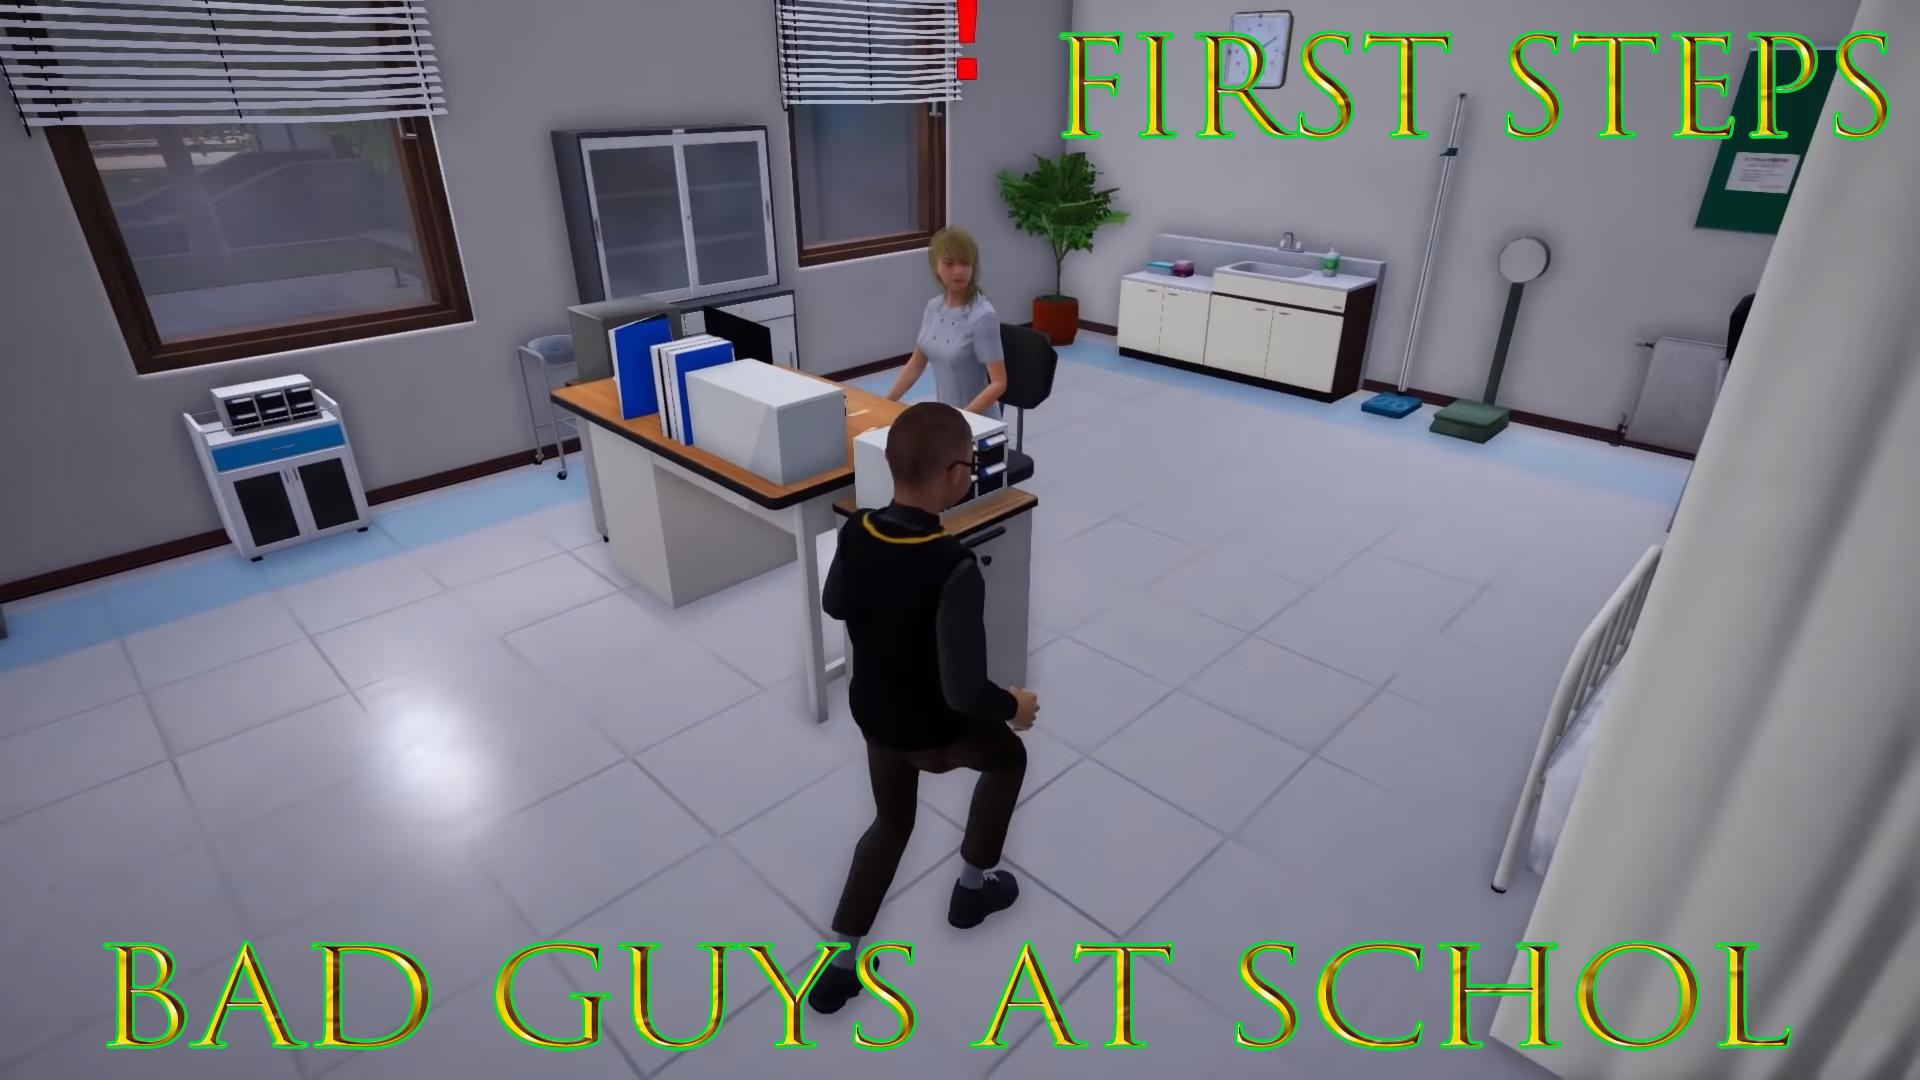 First steps in Bad Guys at school 1.0 Screenshot 2